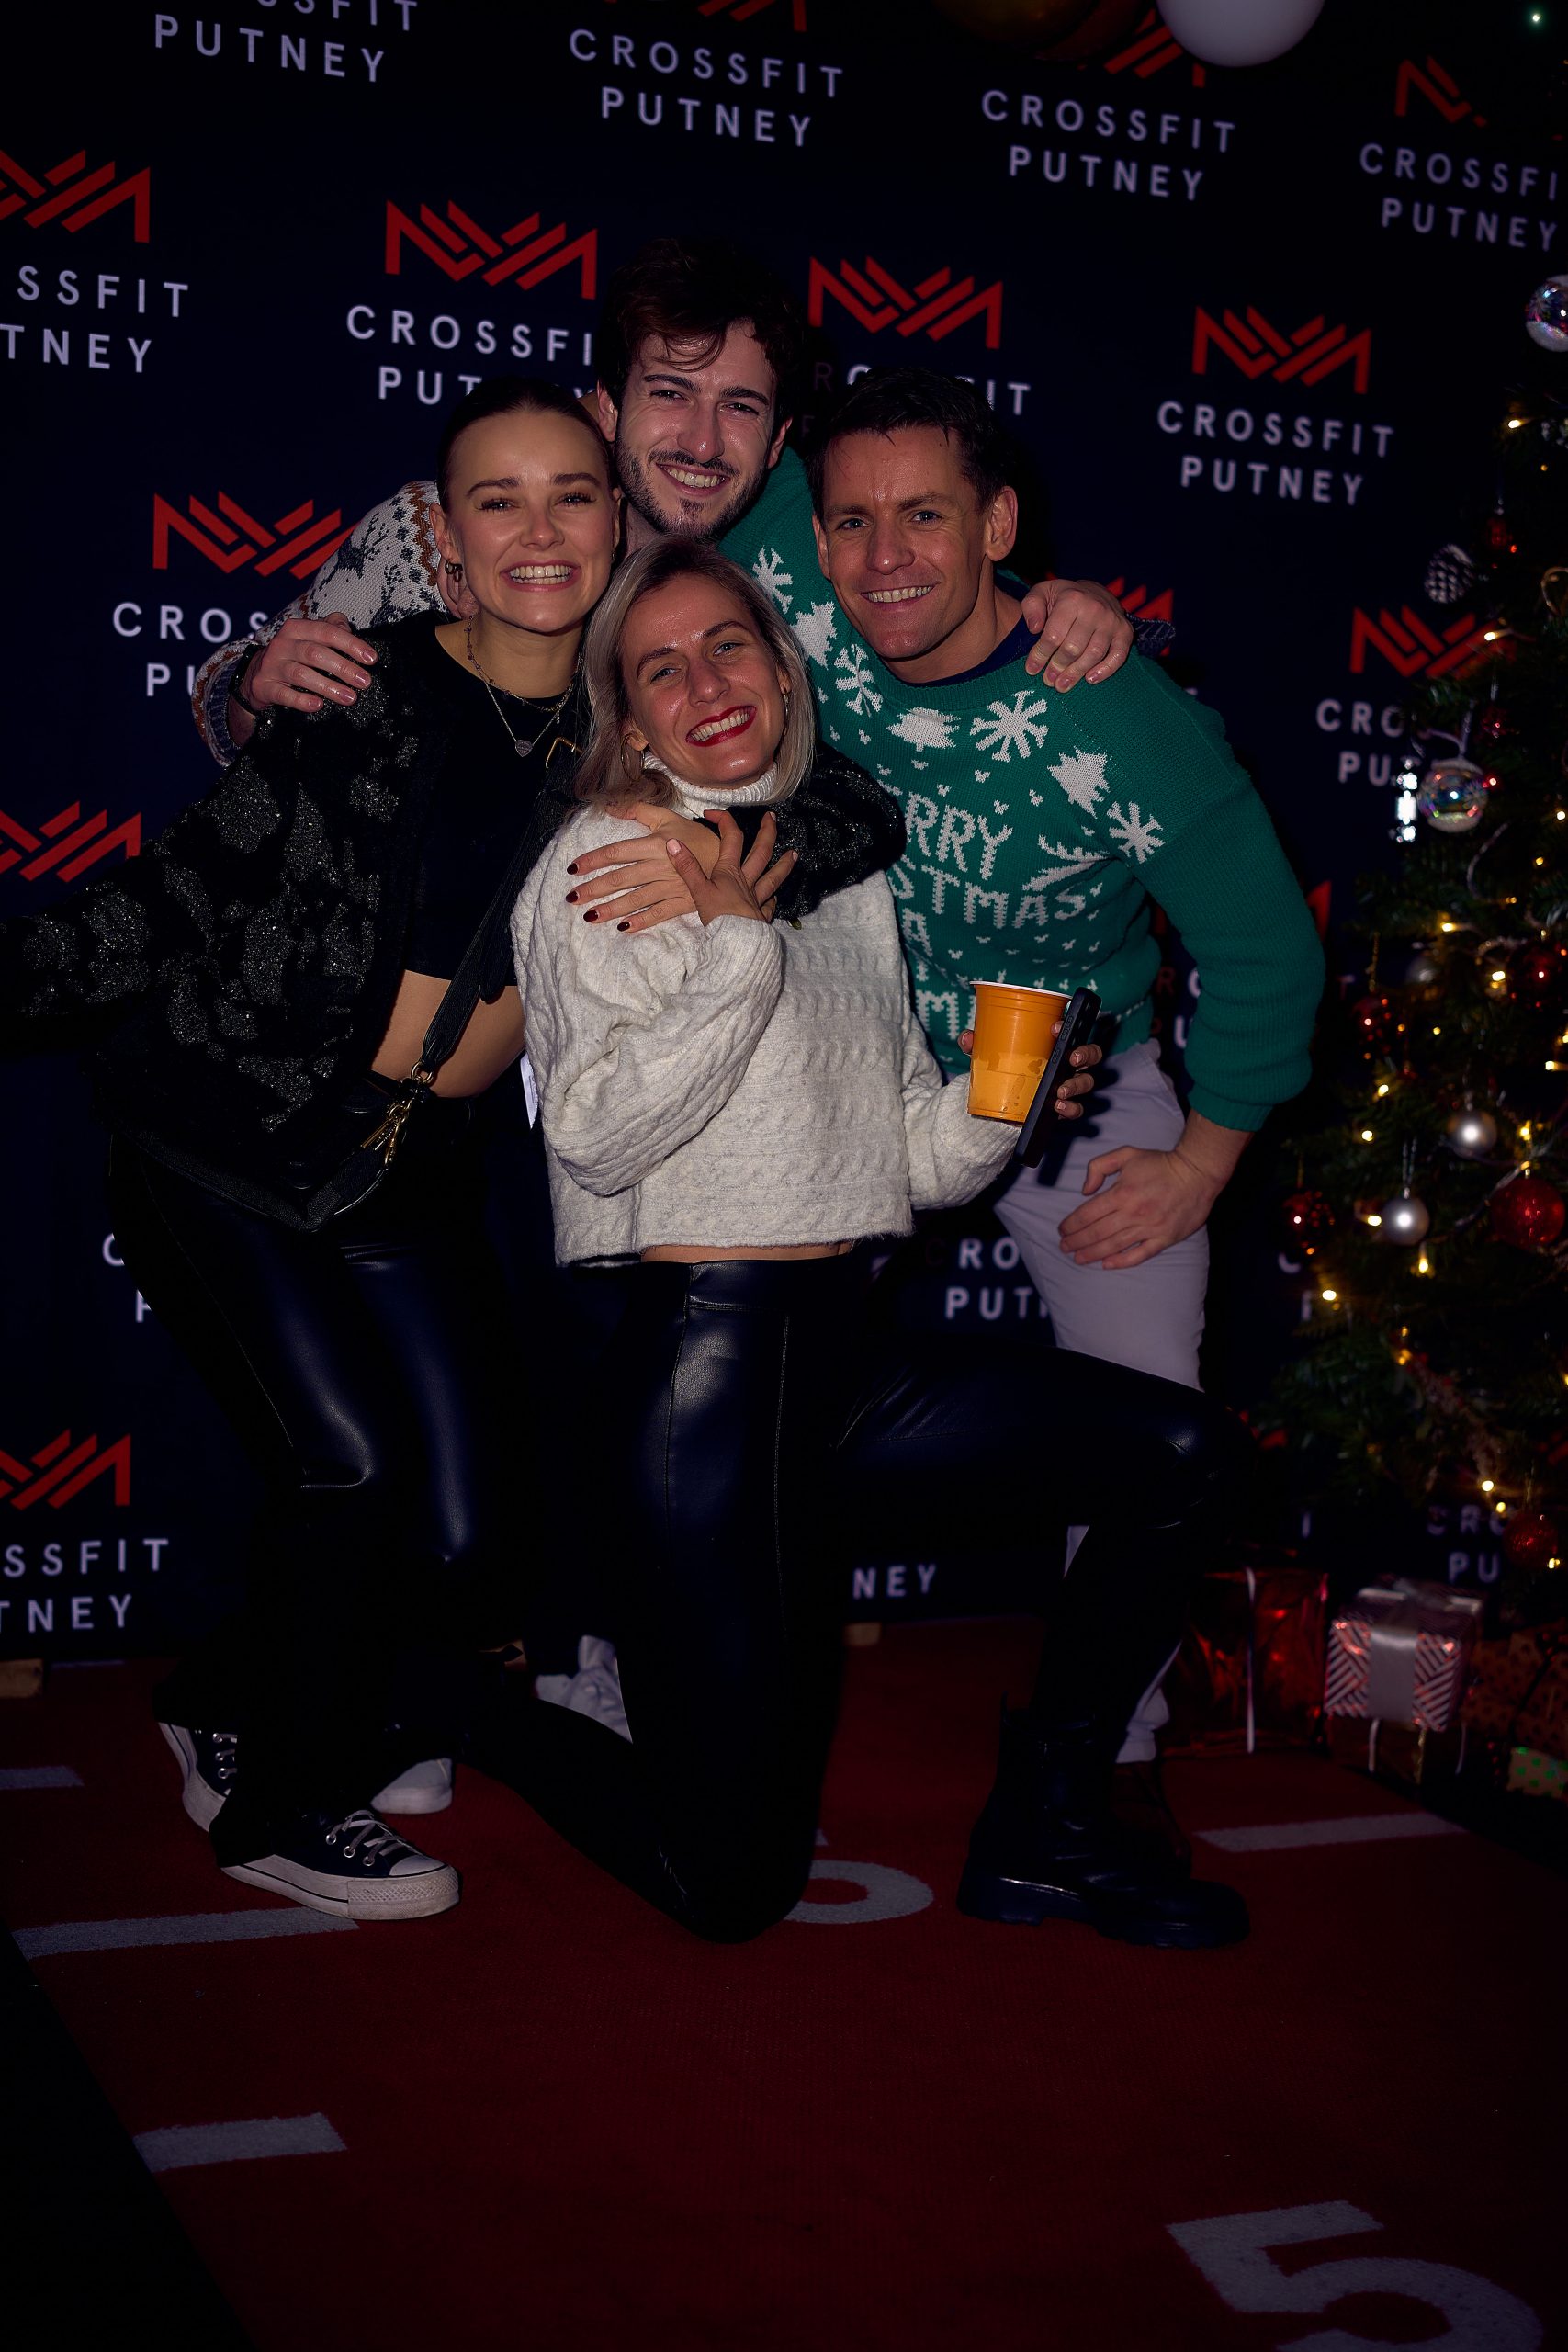 Event Crossfit Xmas party